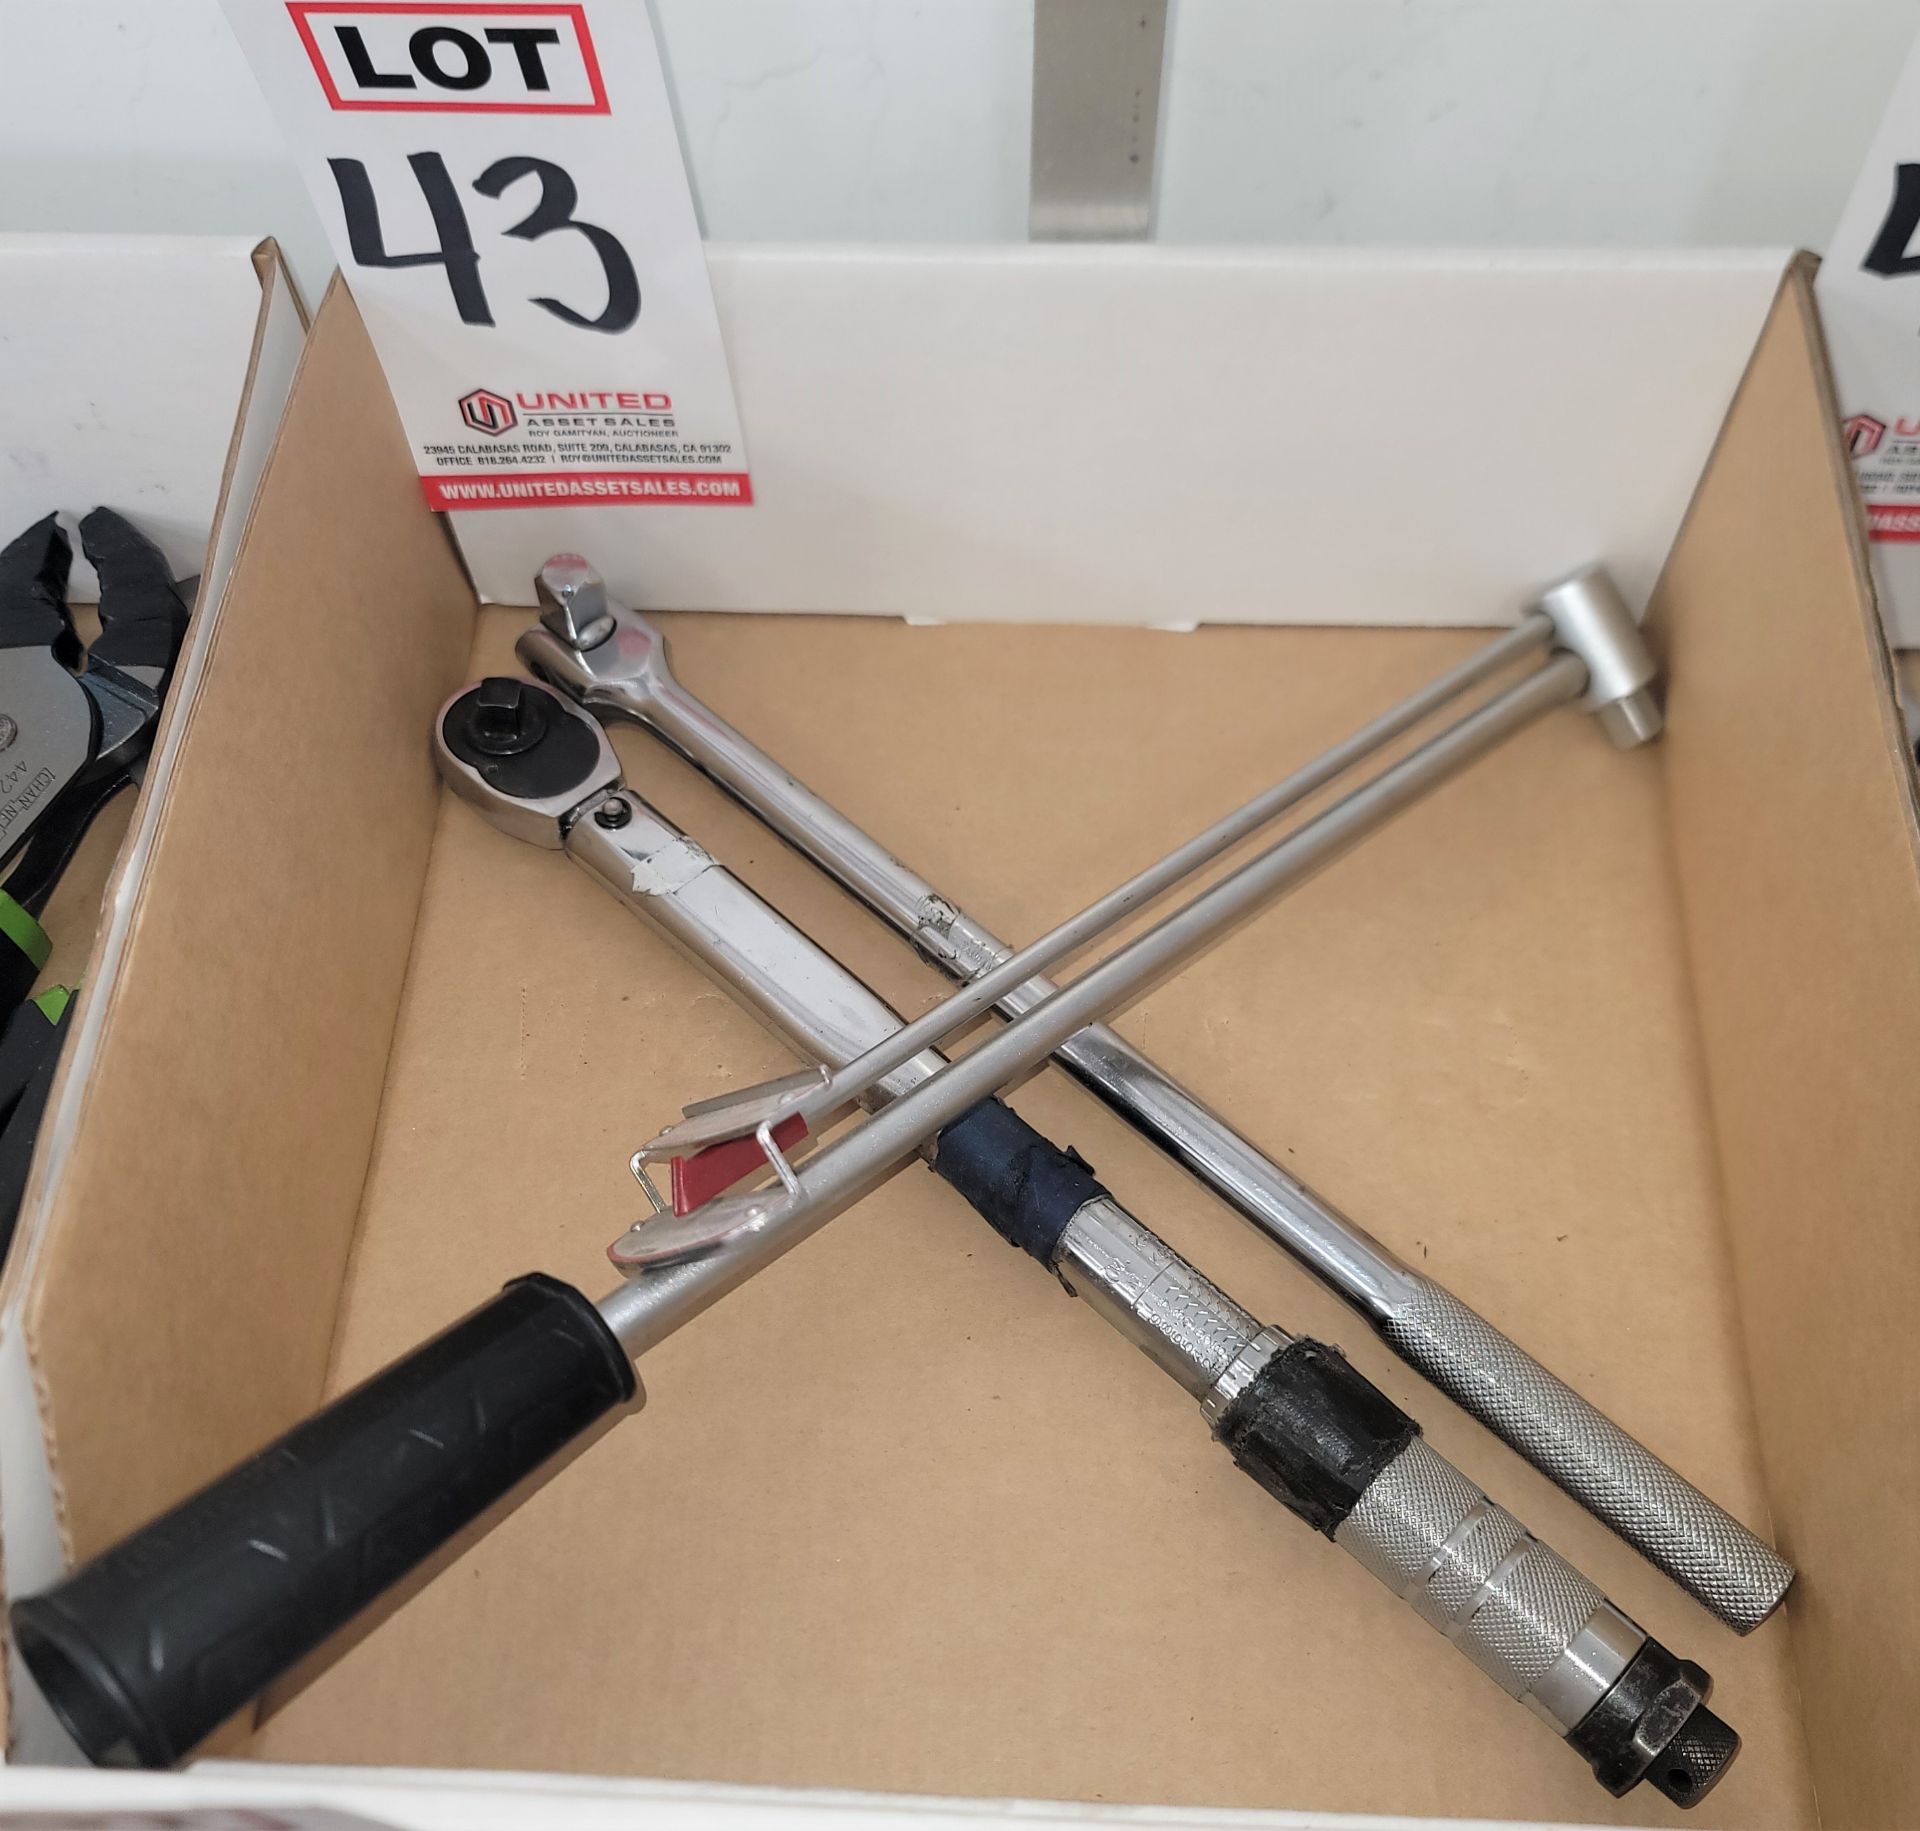 LOT - NEEDLE TORQUE WRENCH, 3/8" DRIVE TORQUE WRENCH, 1/2" DRIVE BREAKER BAR